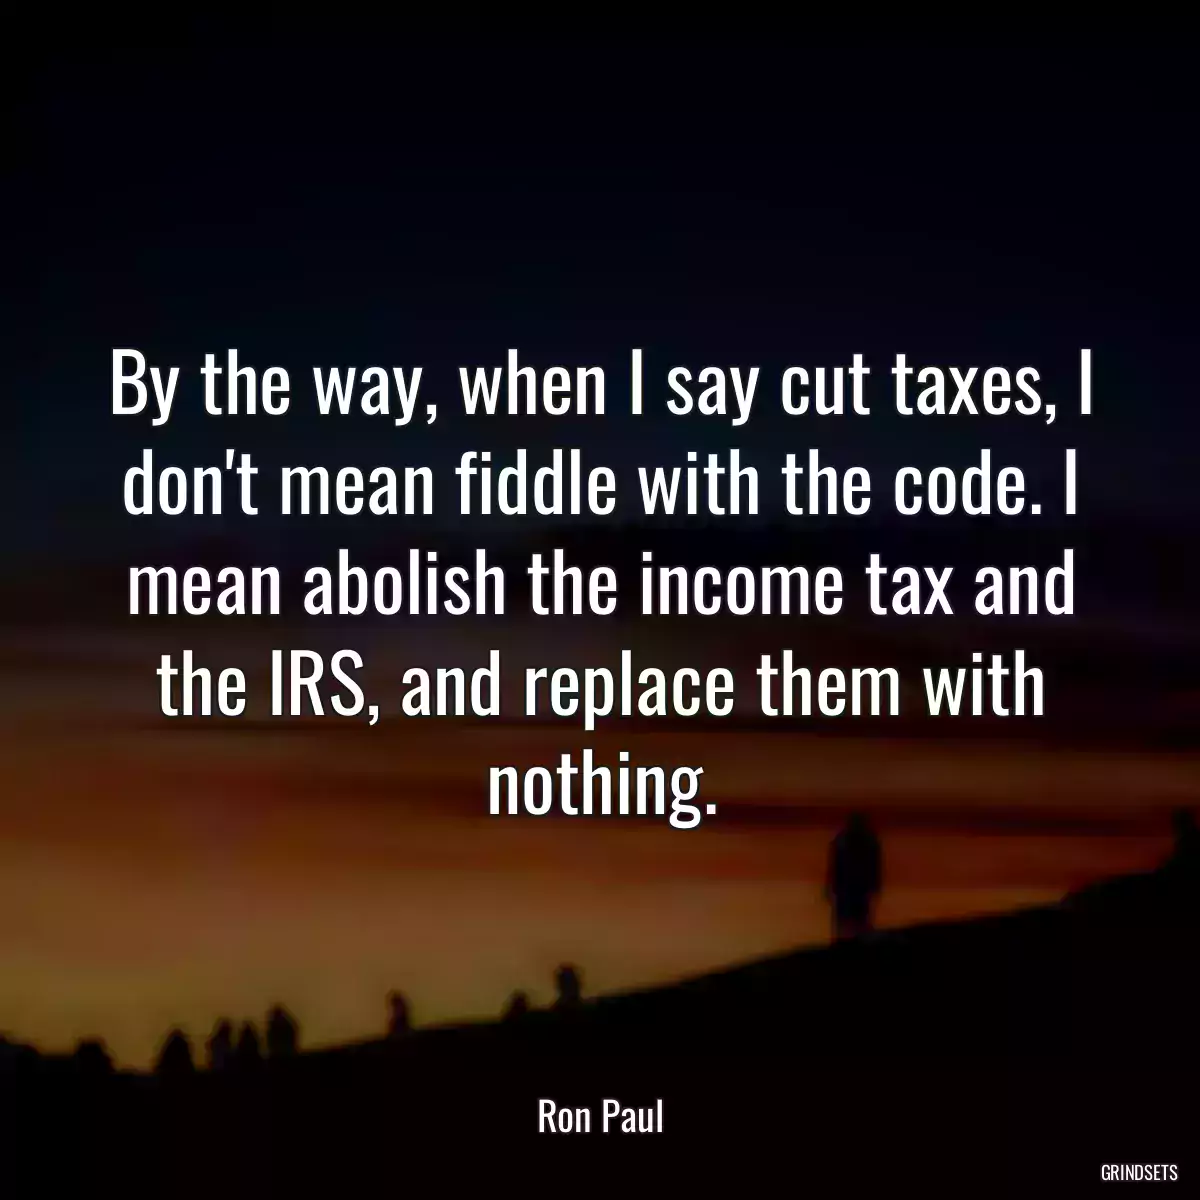 By the way, when I say cut taxes, I don\'t mean fiddle with the code. I mean abolish the income tax and the IRS, and replace them with nothing.